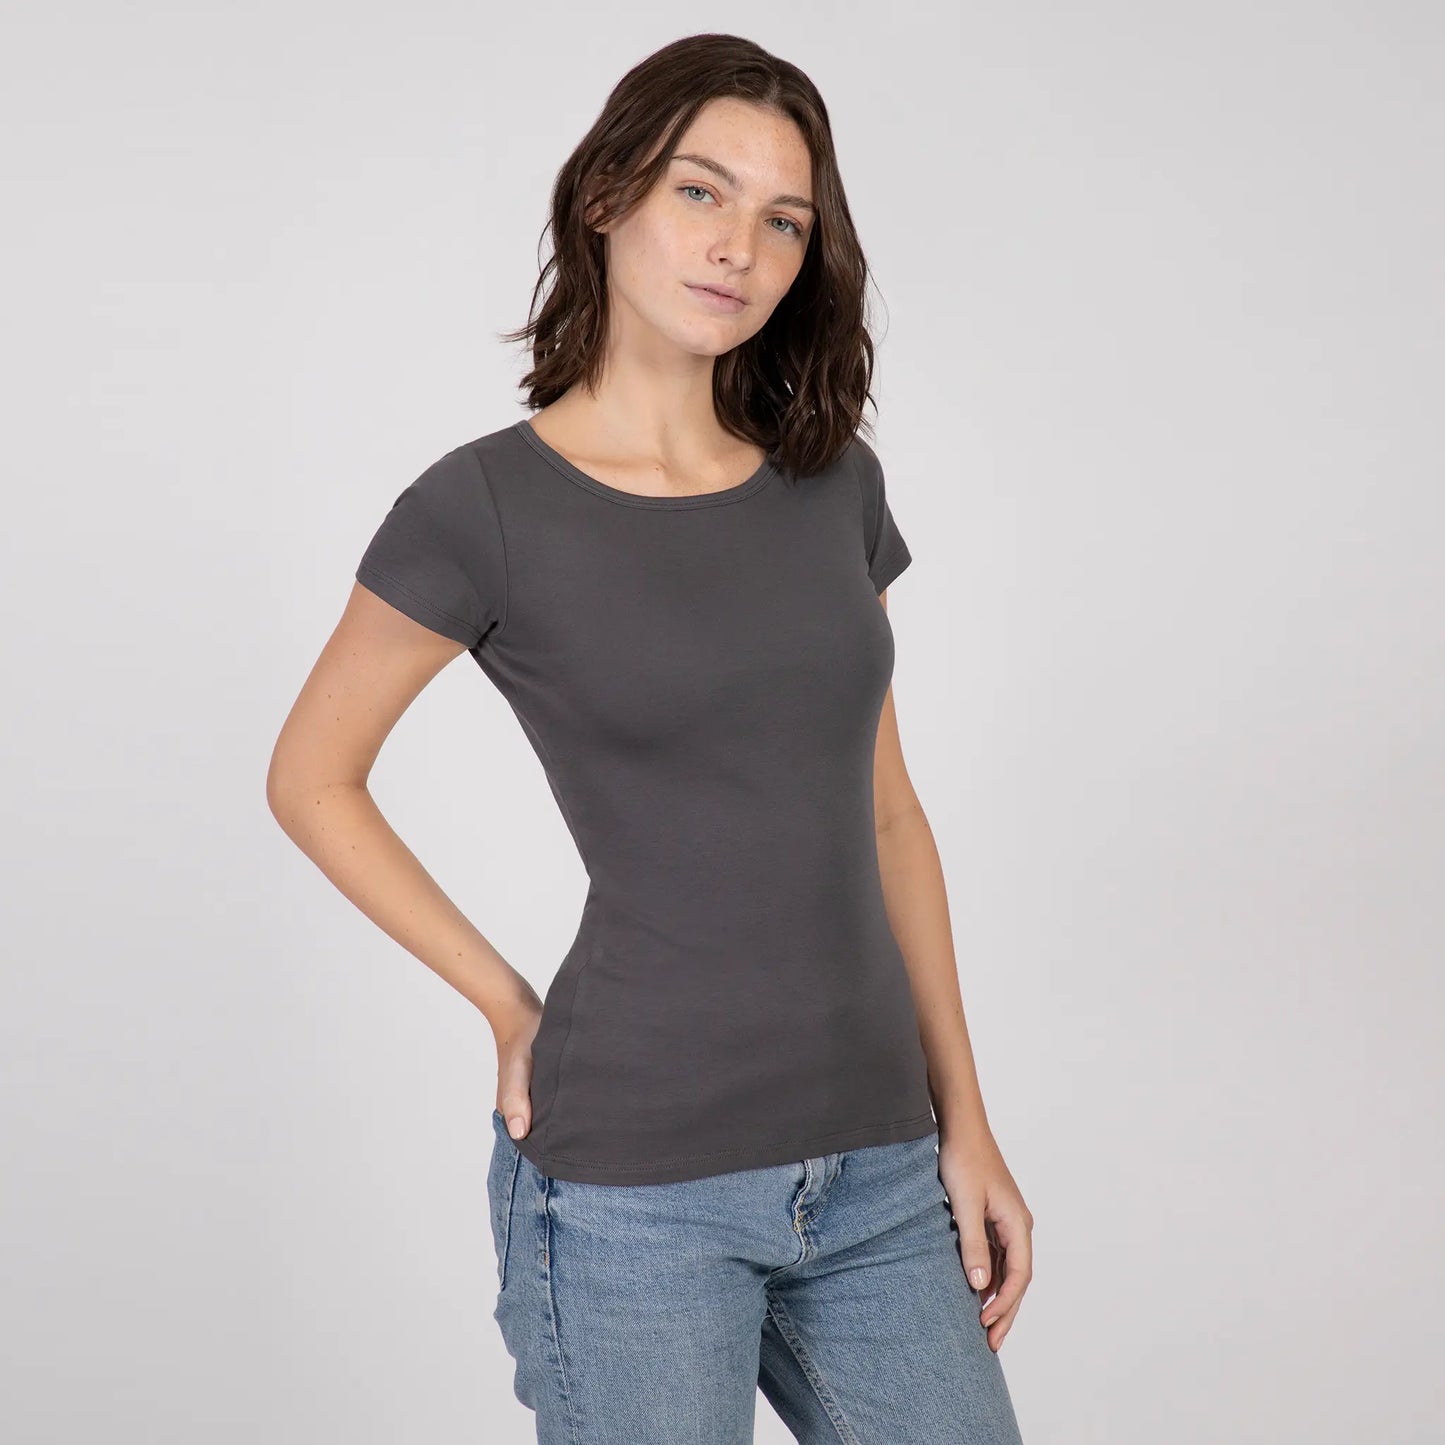 womens sustainable tee tshirt crew neck color gray